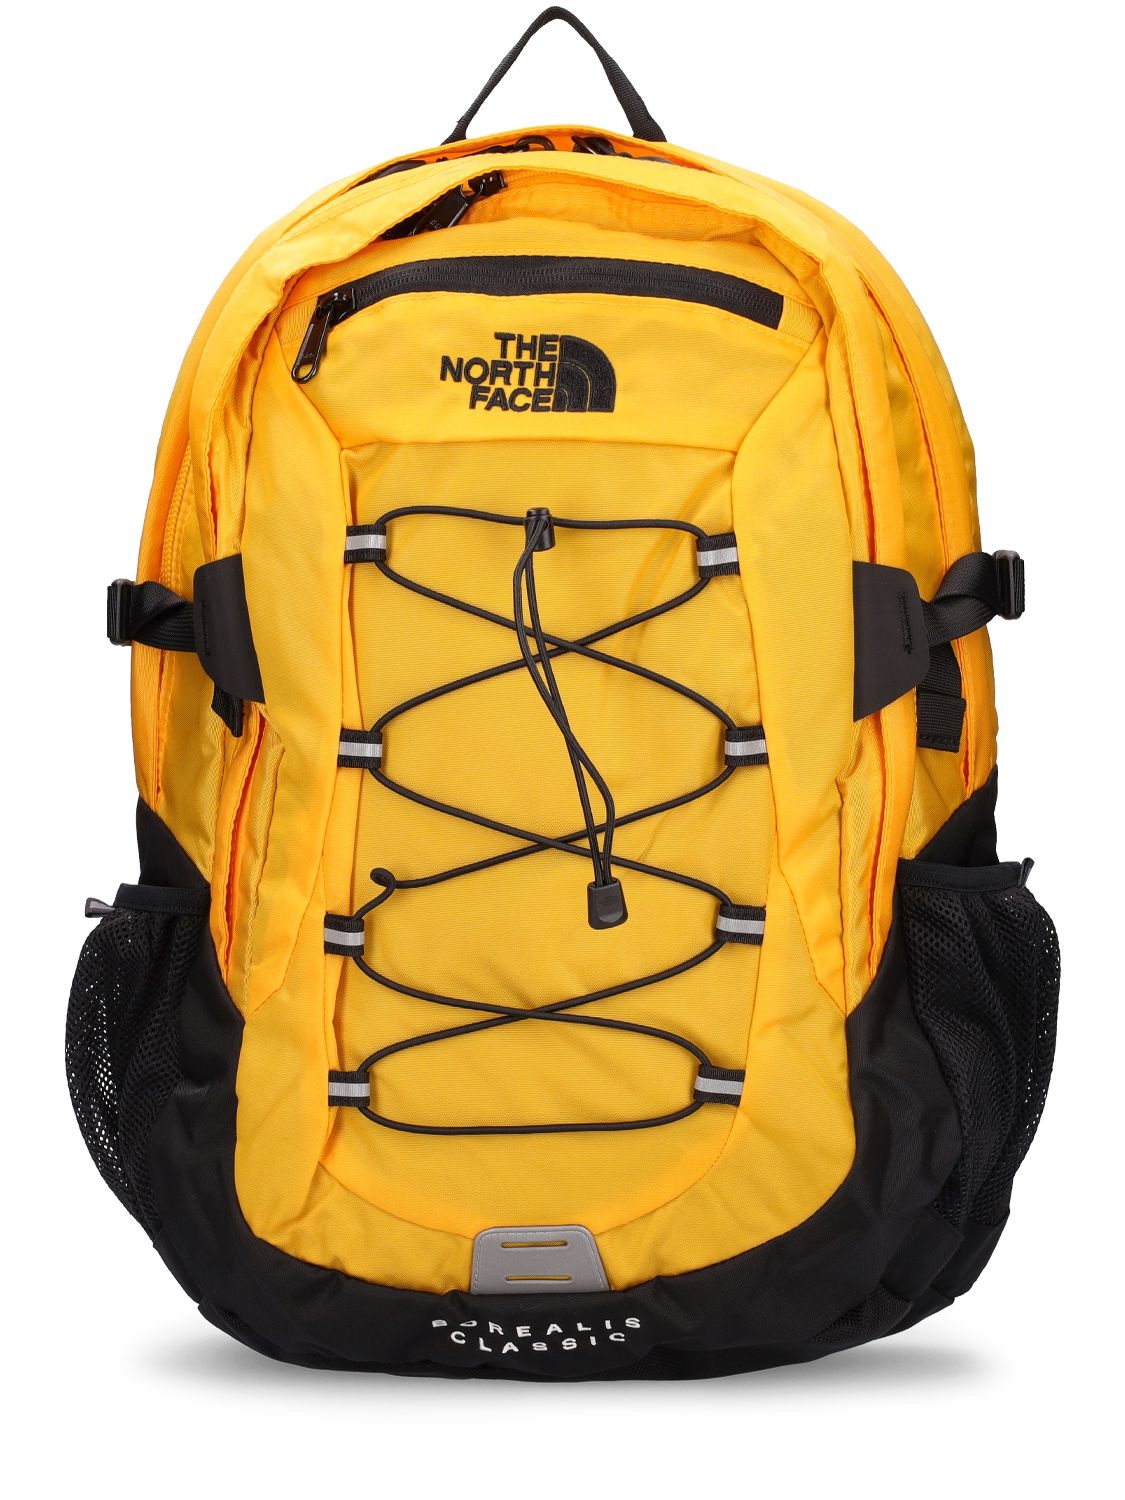 THE NORTH FACE 29l Borealis Classic Backpack